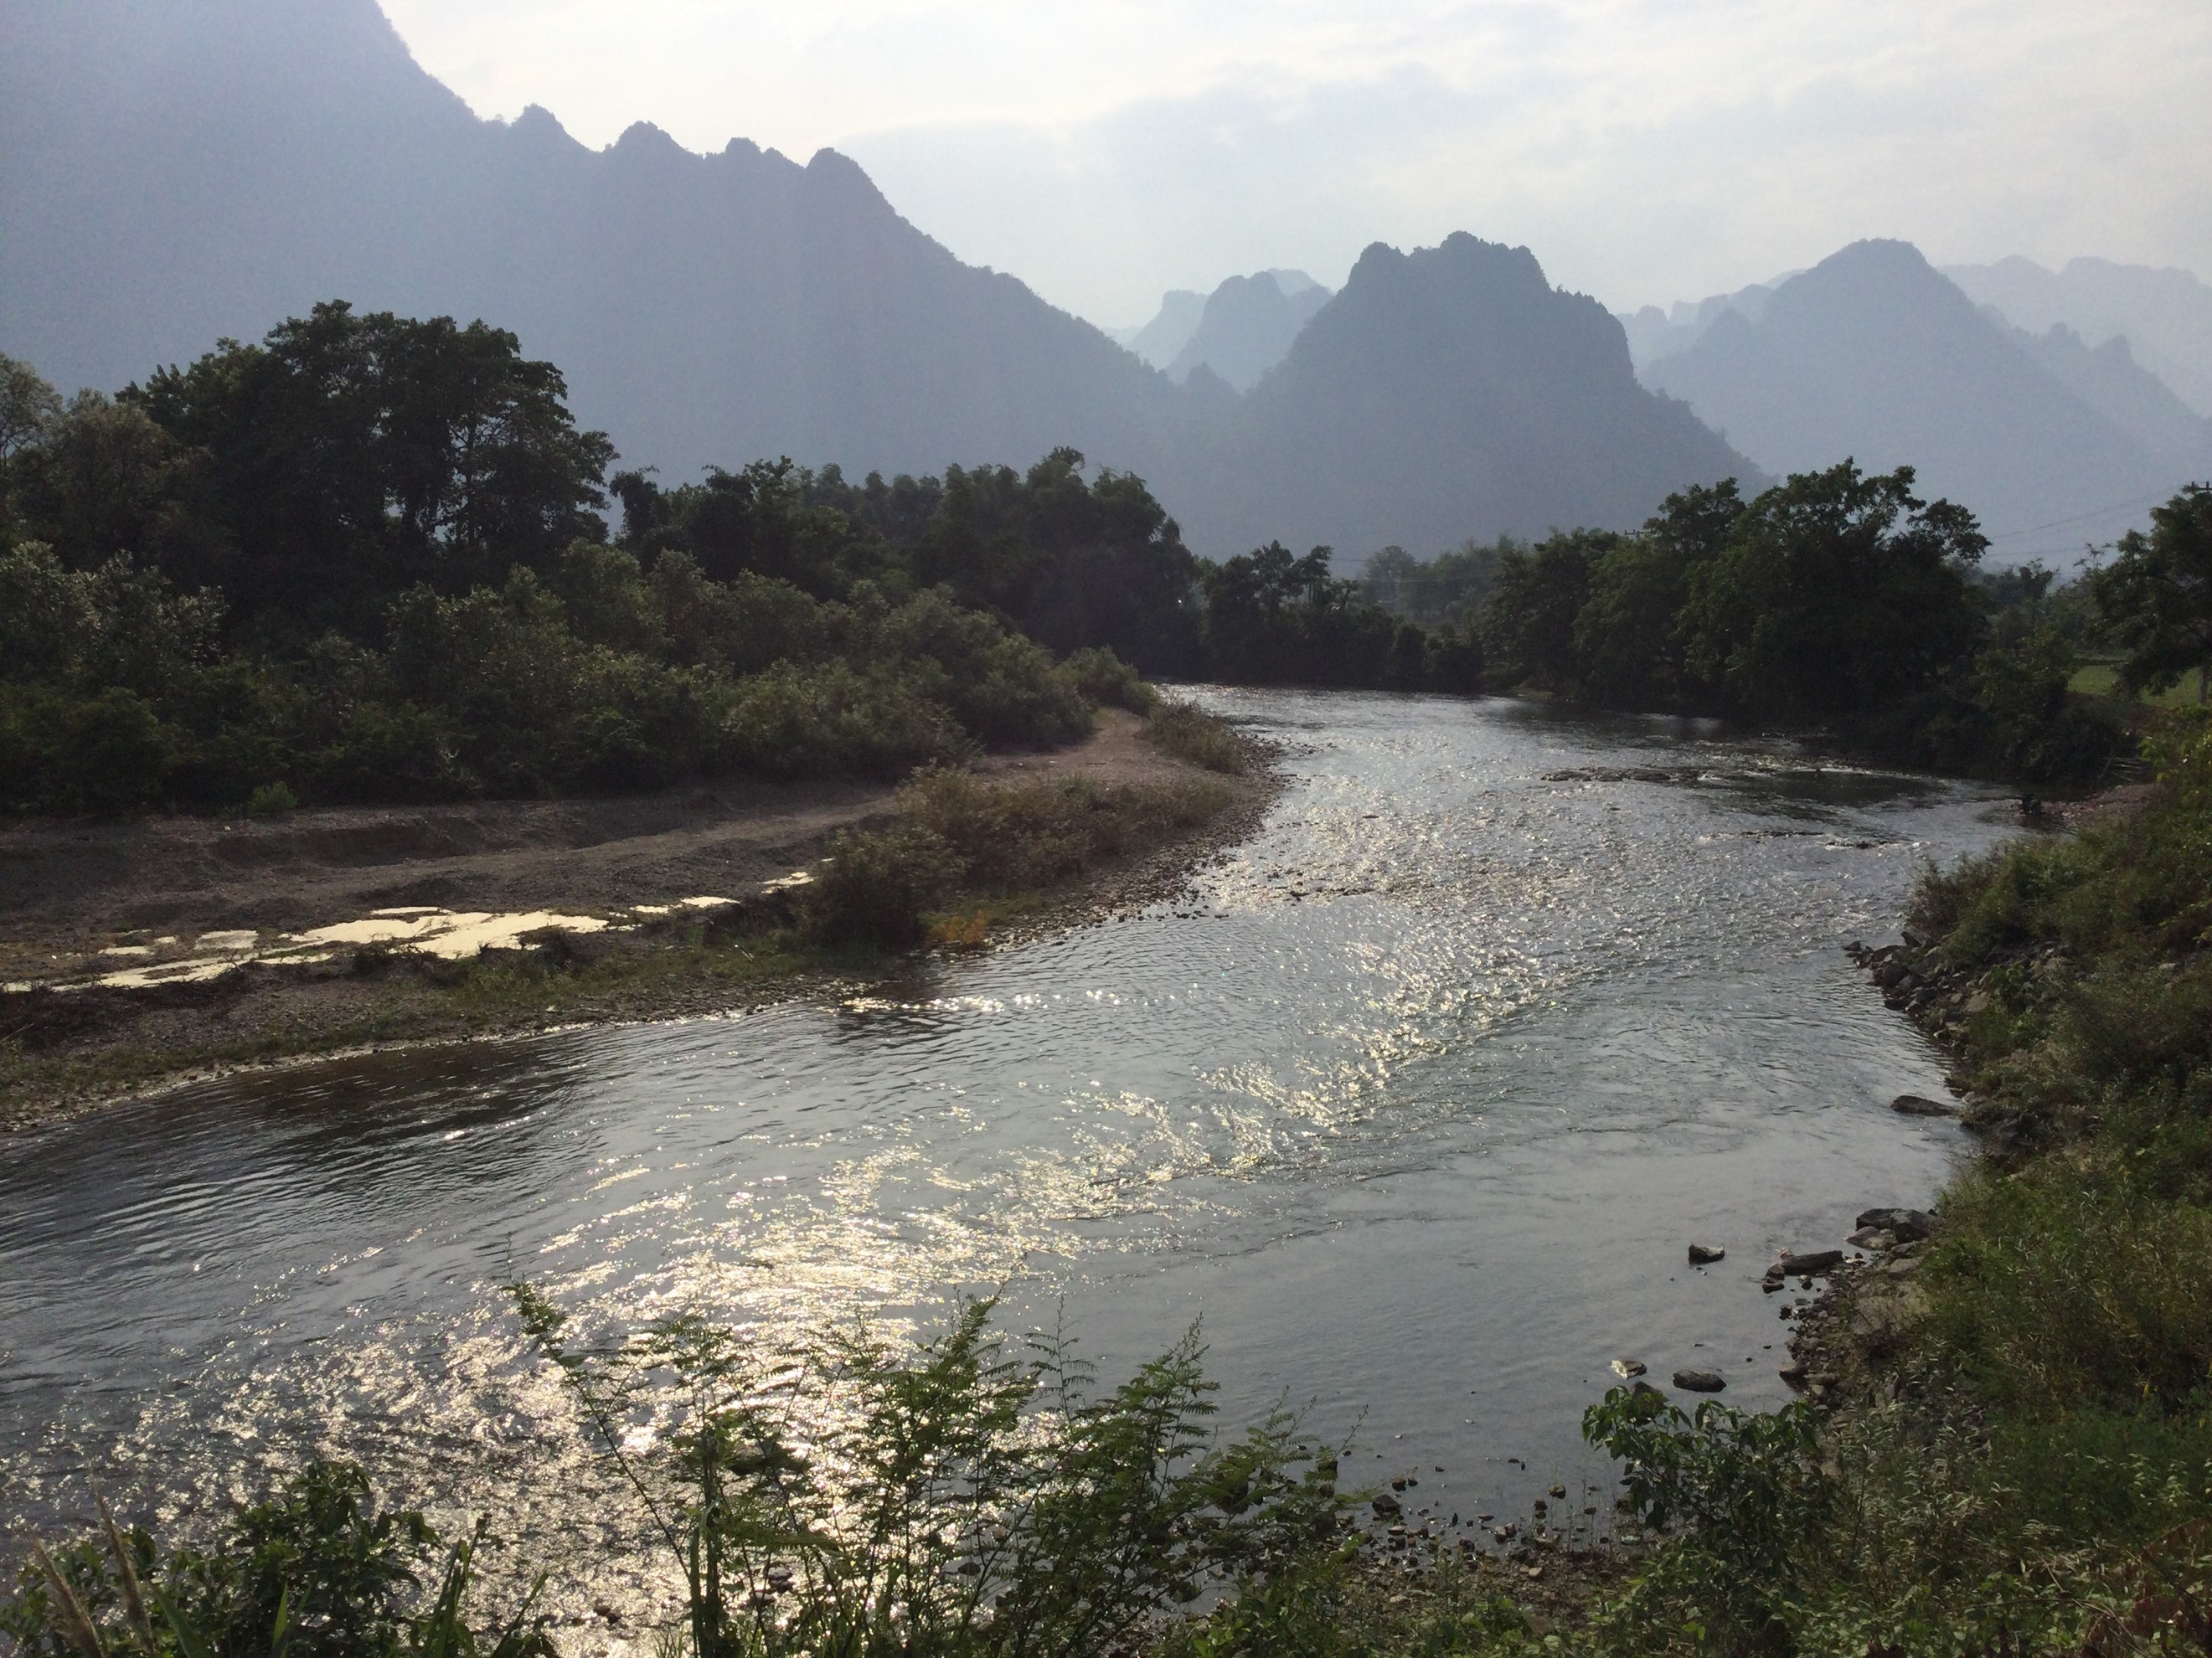 HIKING AND PAINTING IN LAOS